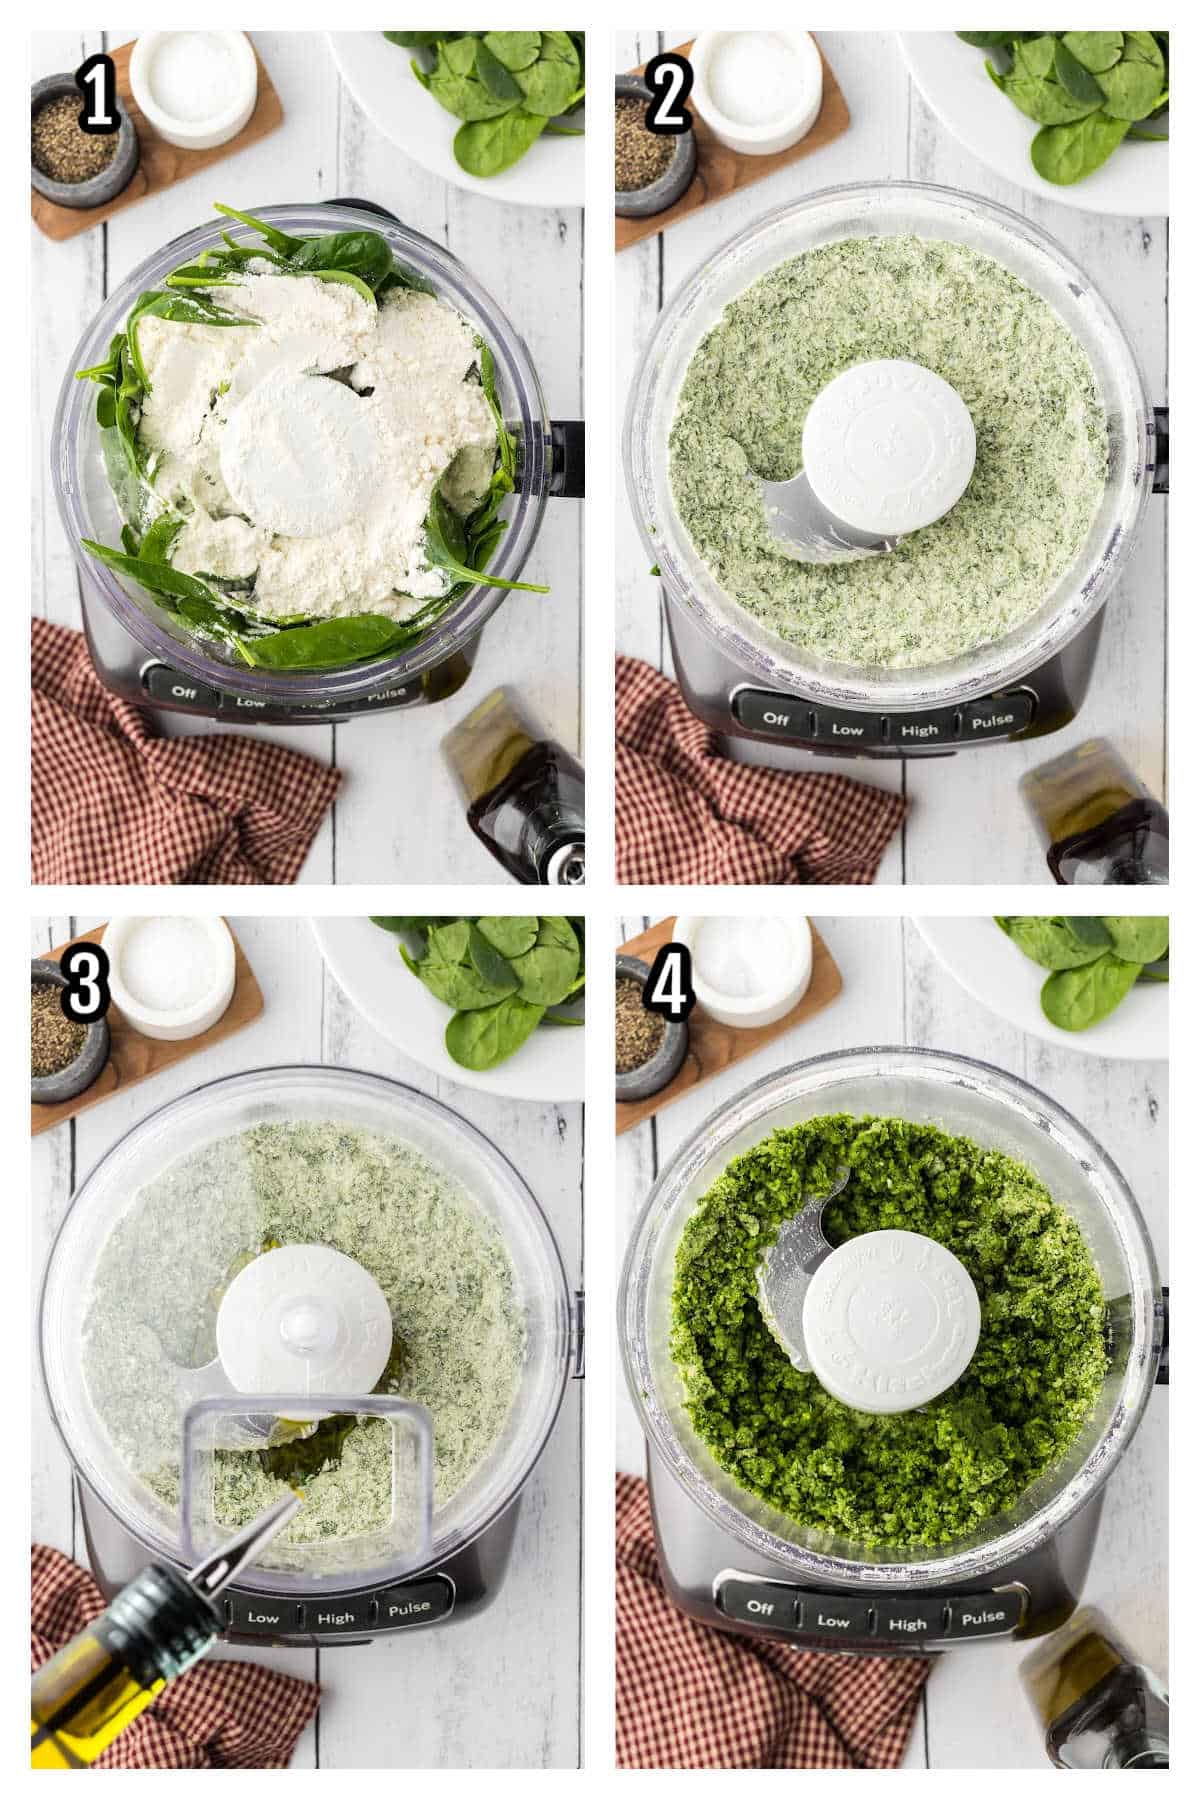 The first collage features the beginning steps of making the spinach pici. 